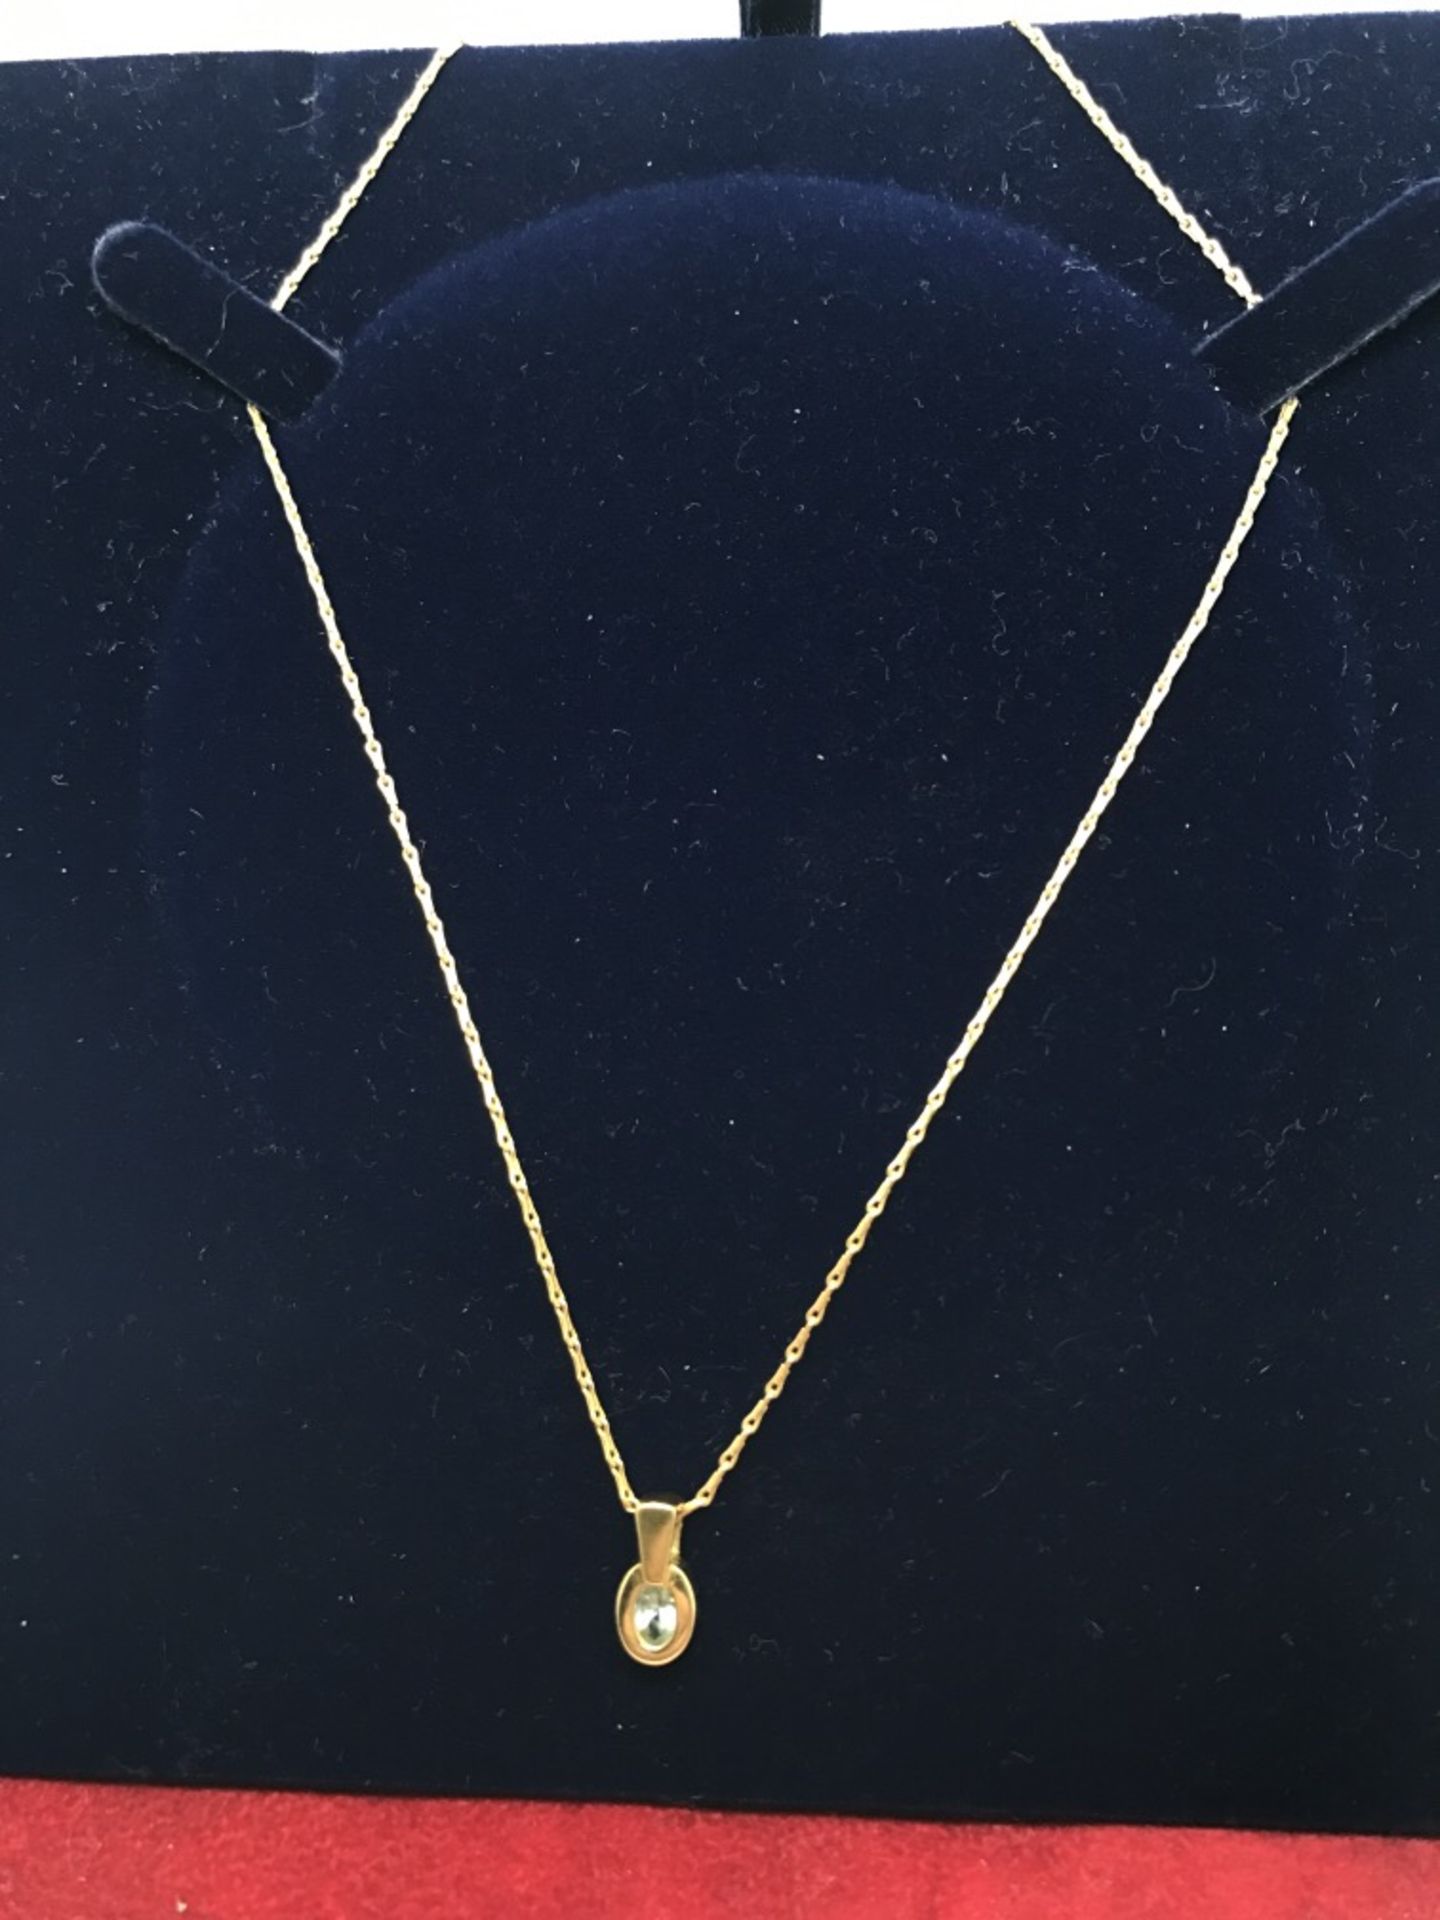 9CT GOLD PENDANT & CHAIN - UNUSUAL CHAIN LINK - Image 3 of 3